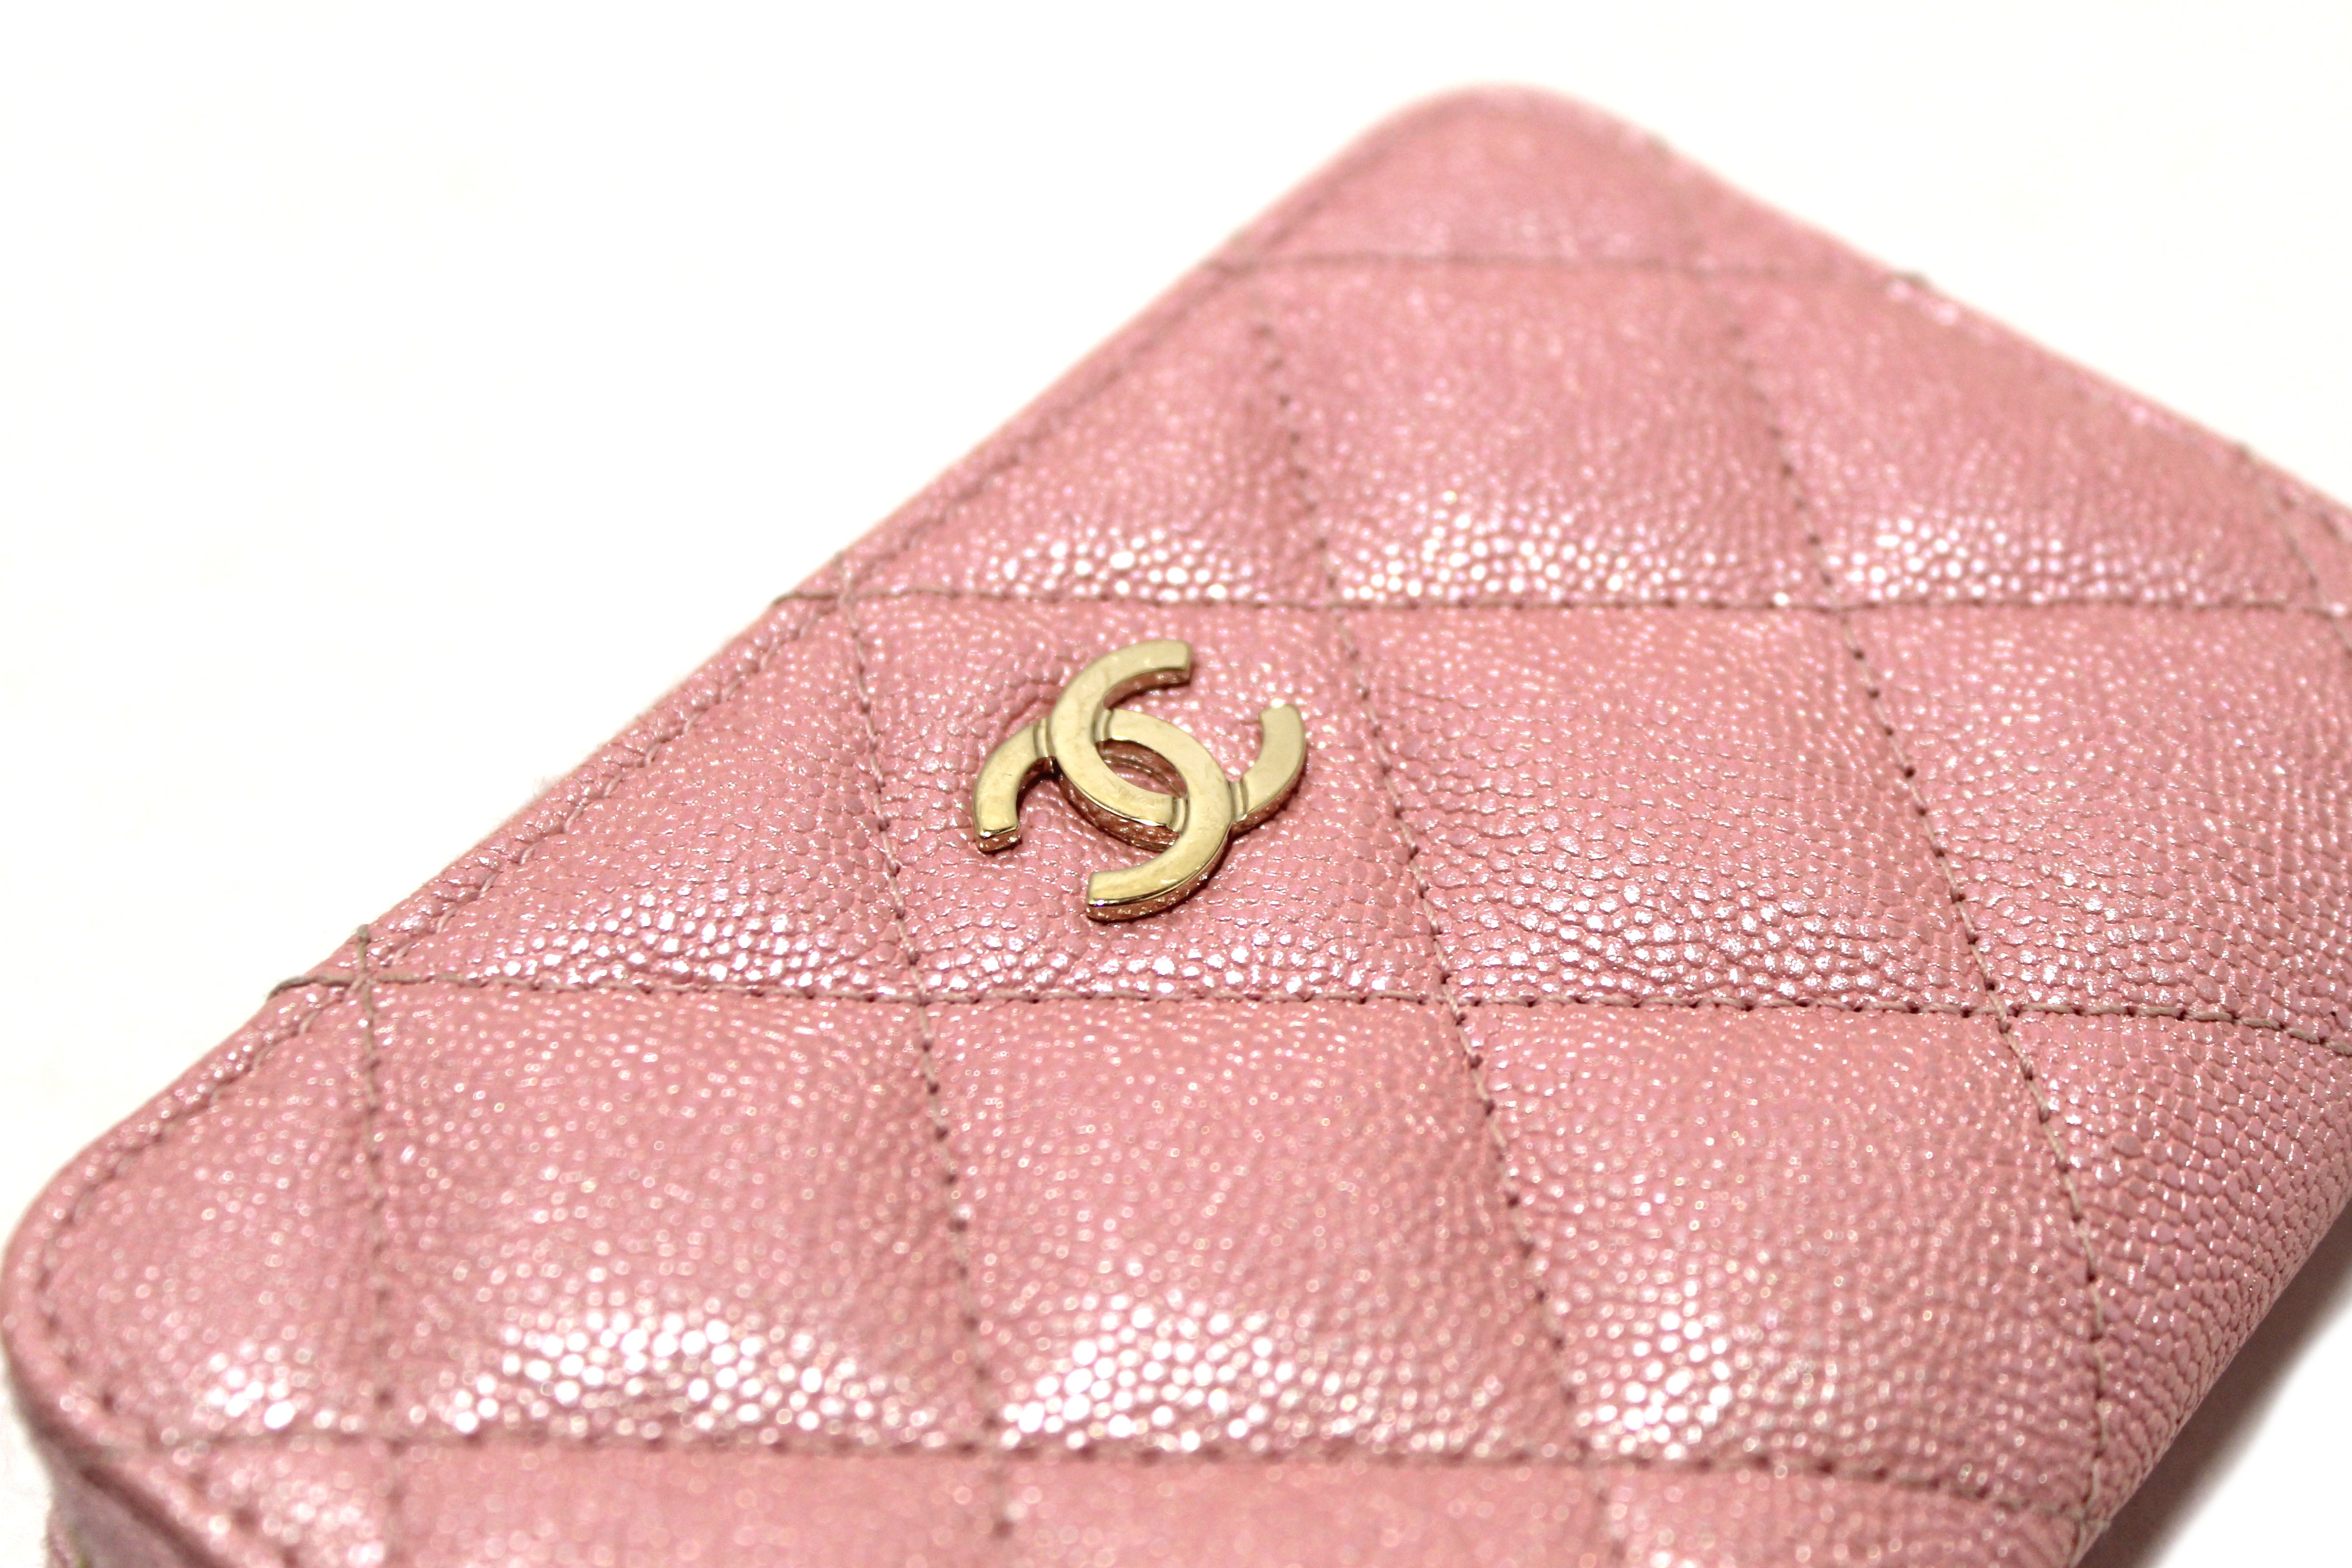 Authentic Chanel Iridescent Rose Pink Quilted Caviar Leather Classic Zipped Coin Purse